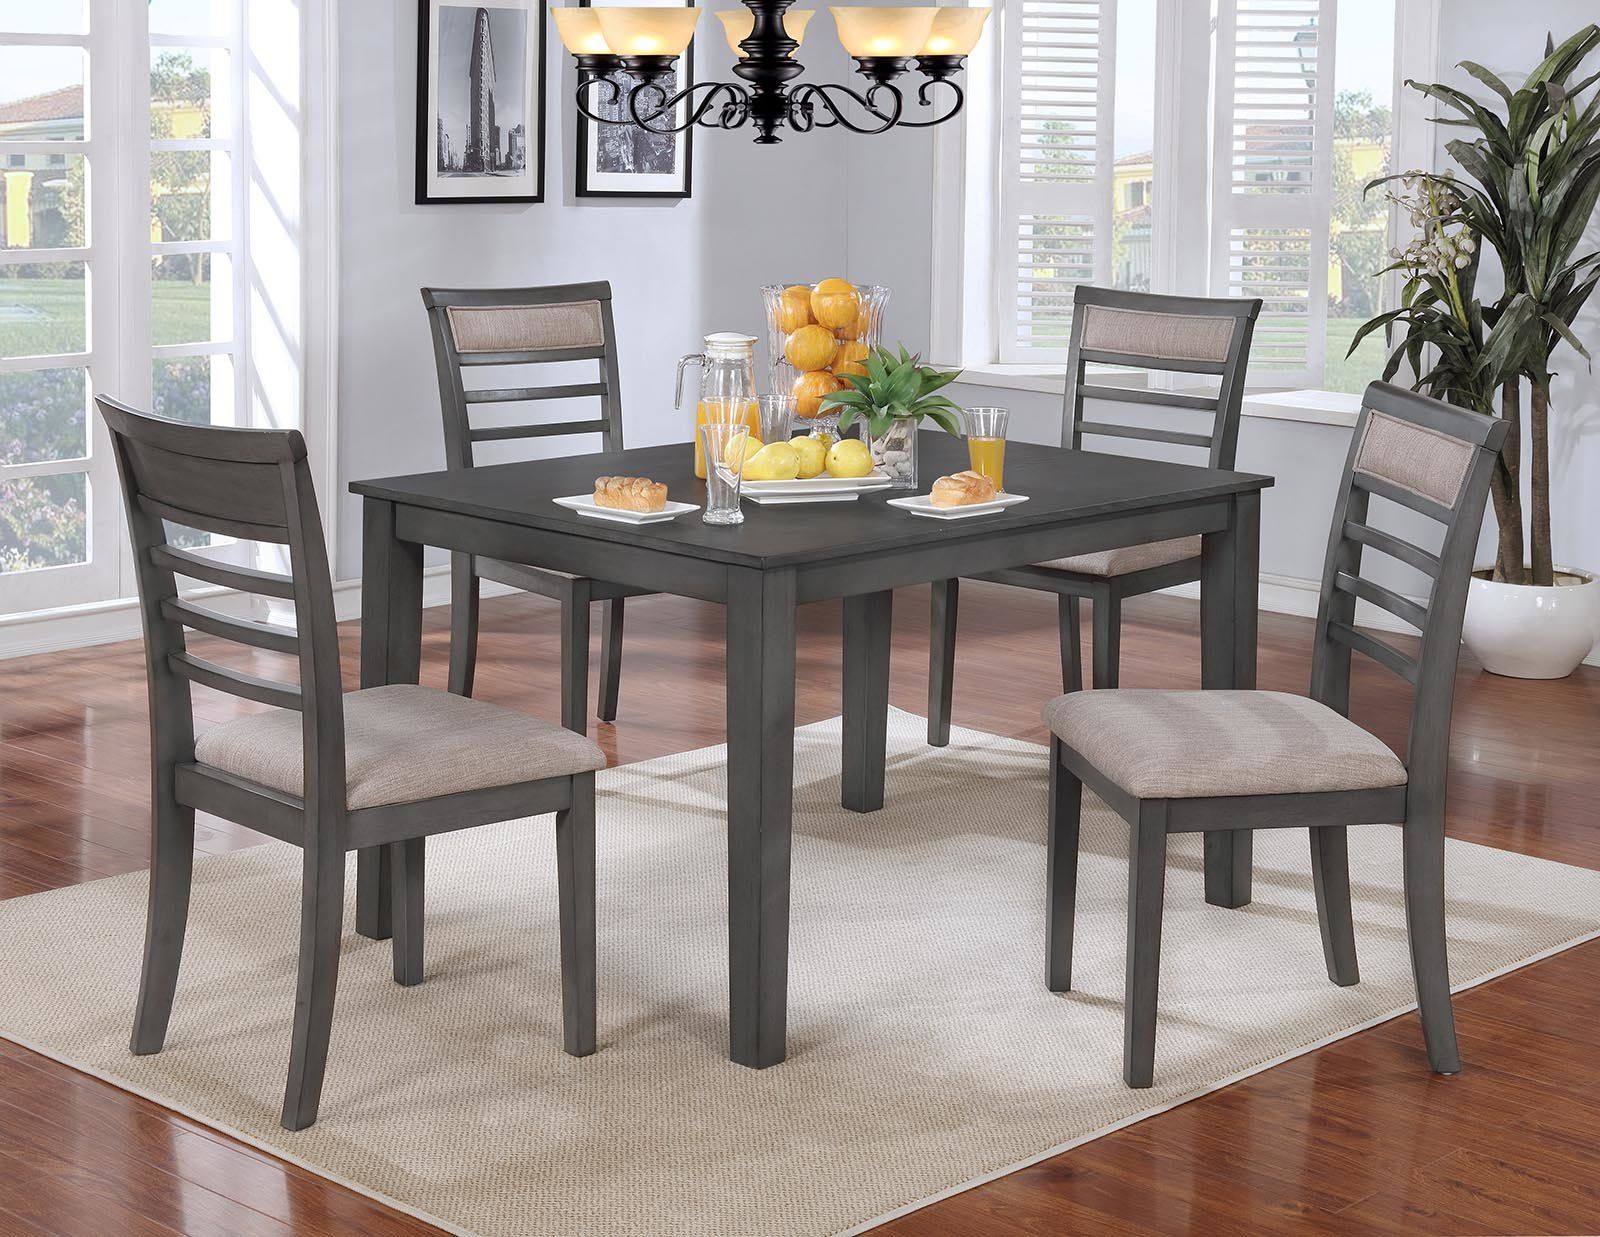 Most Current Red Barrel Studio Romel 5 Piece Dining Set Within Baxton Studio Keitaro 5 Piece Dining Sets (View 4 of 20)